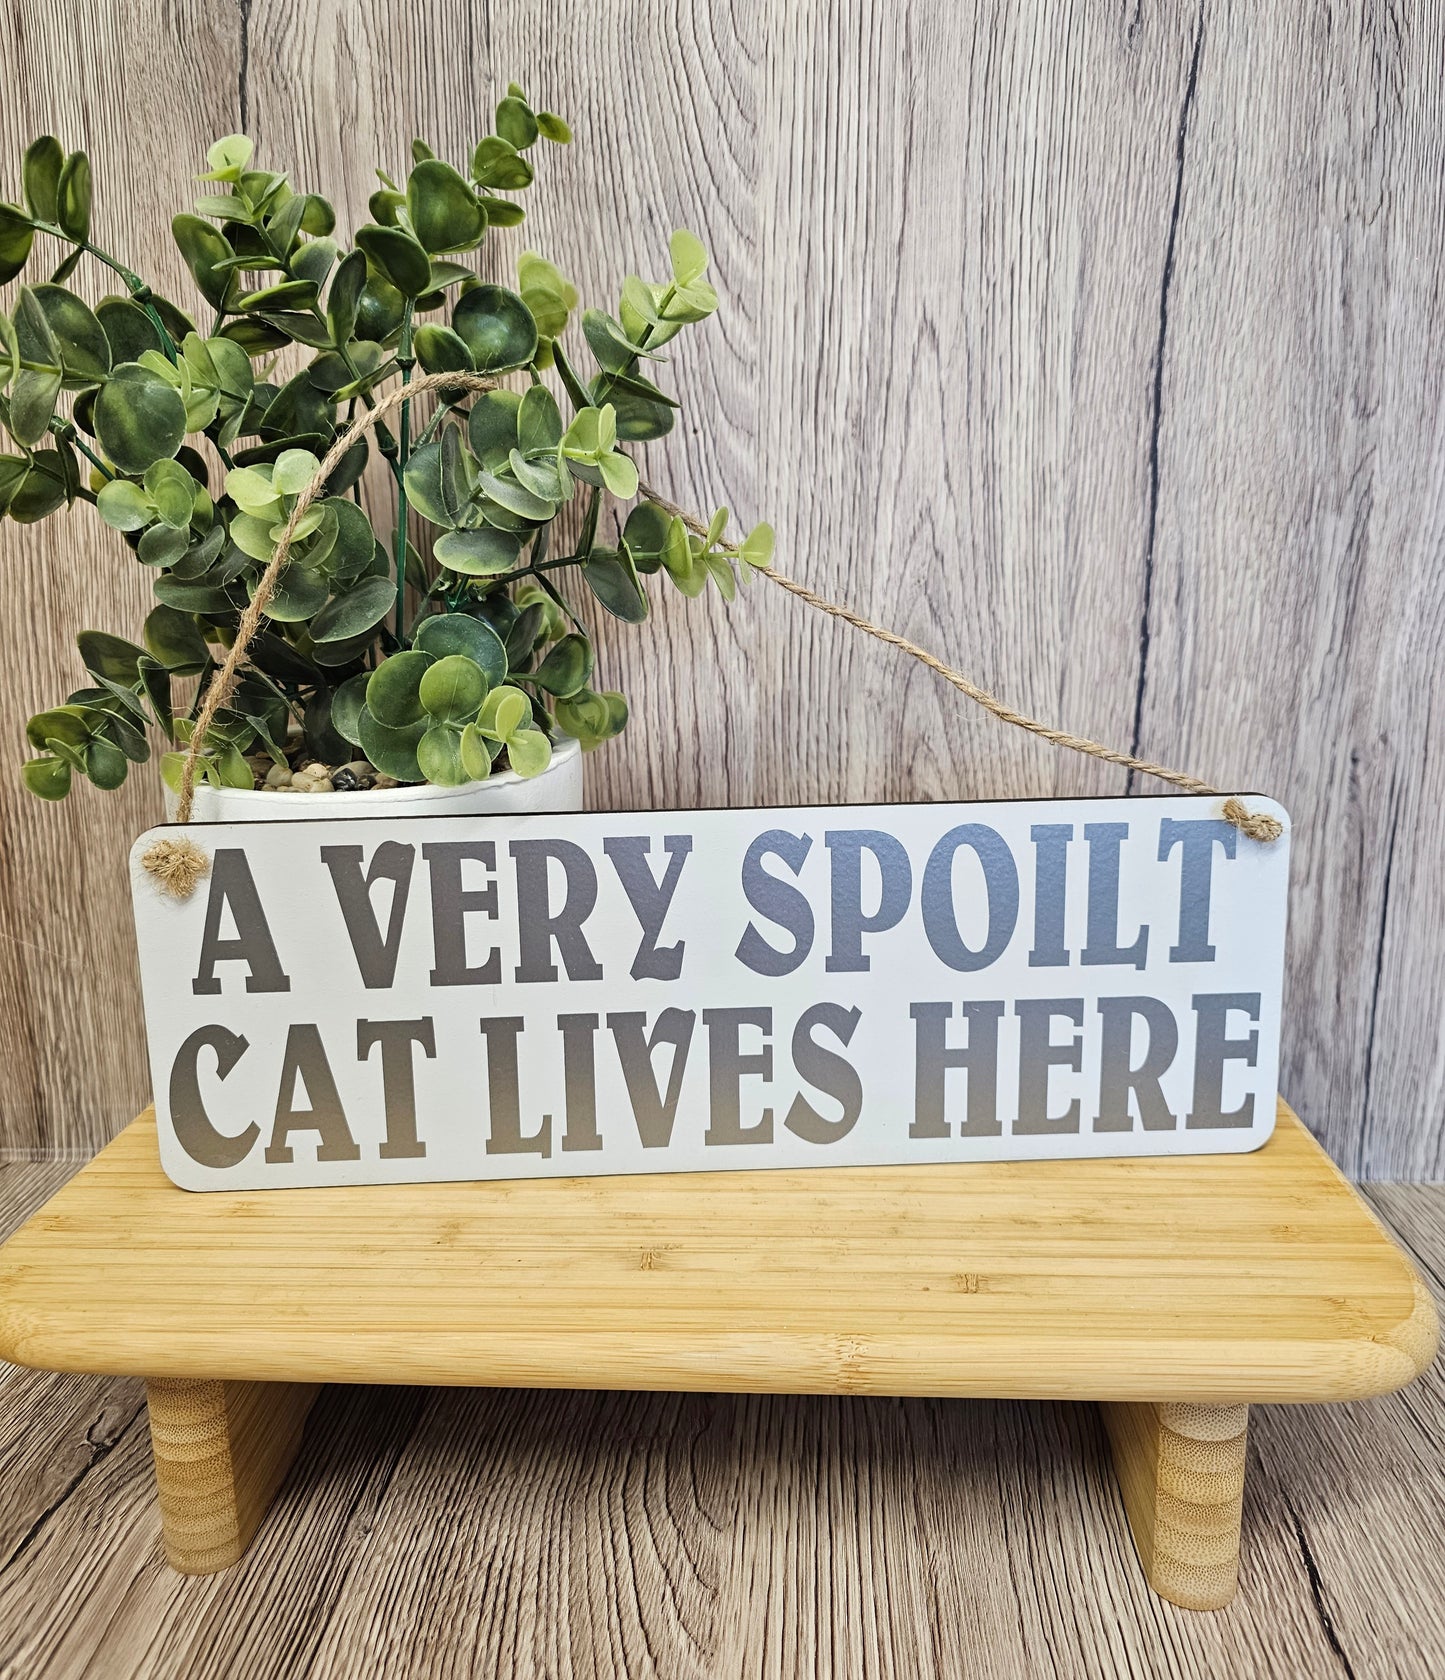 Funny Wall Plaque